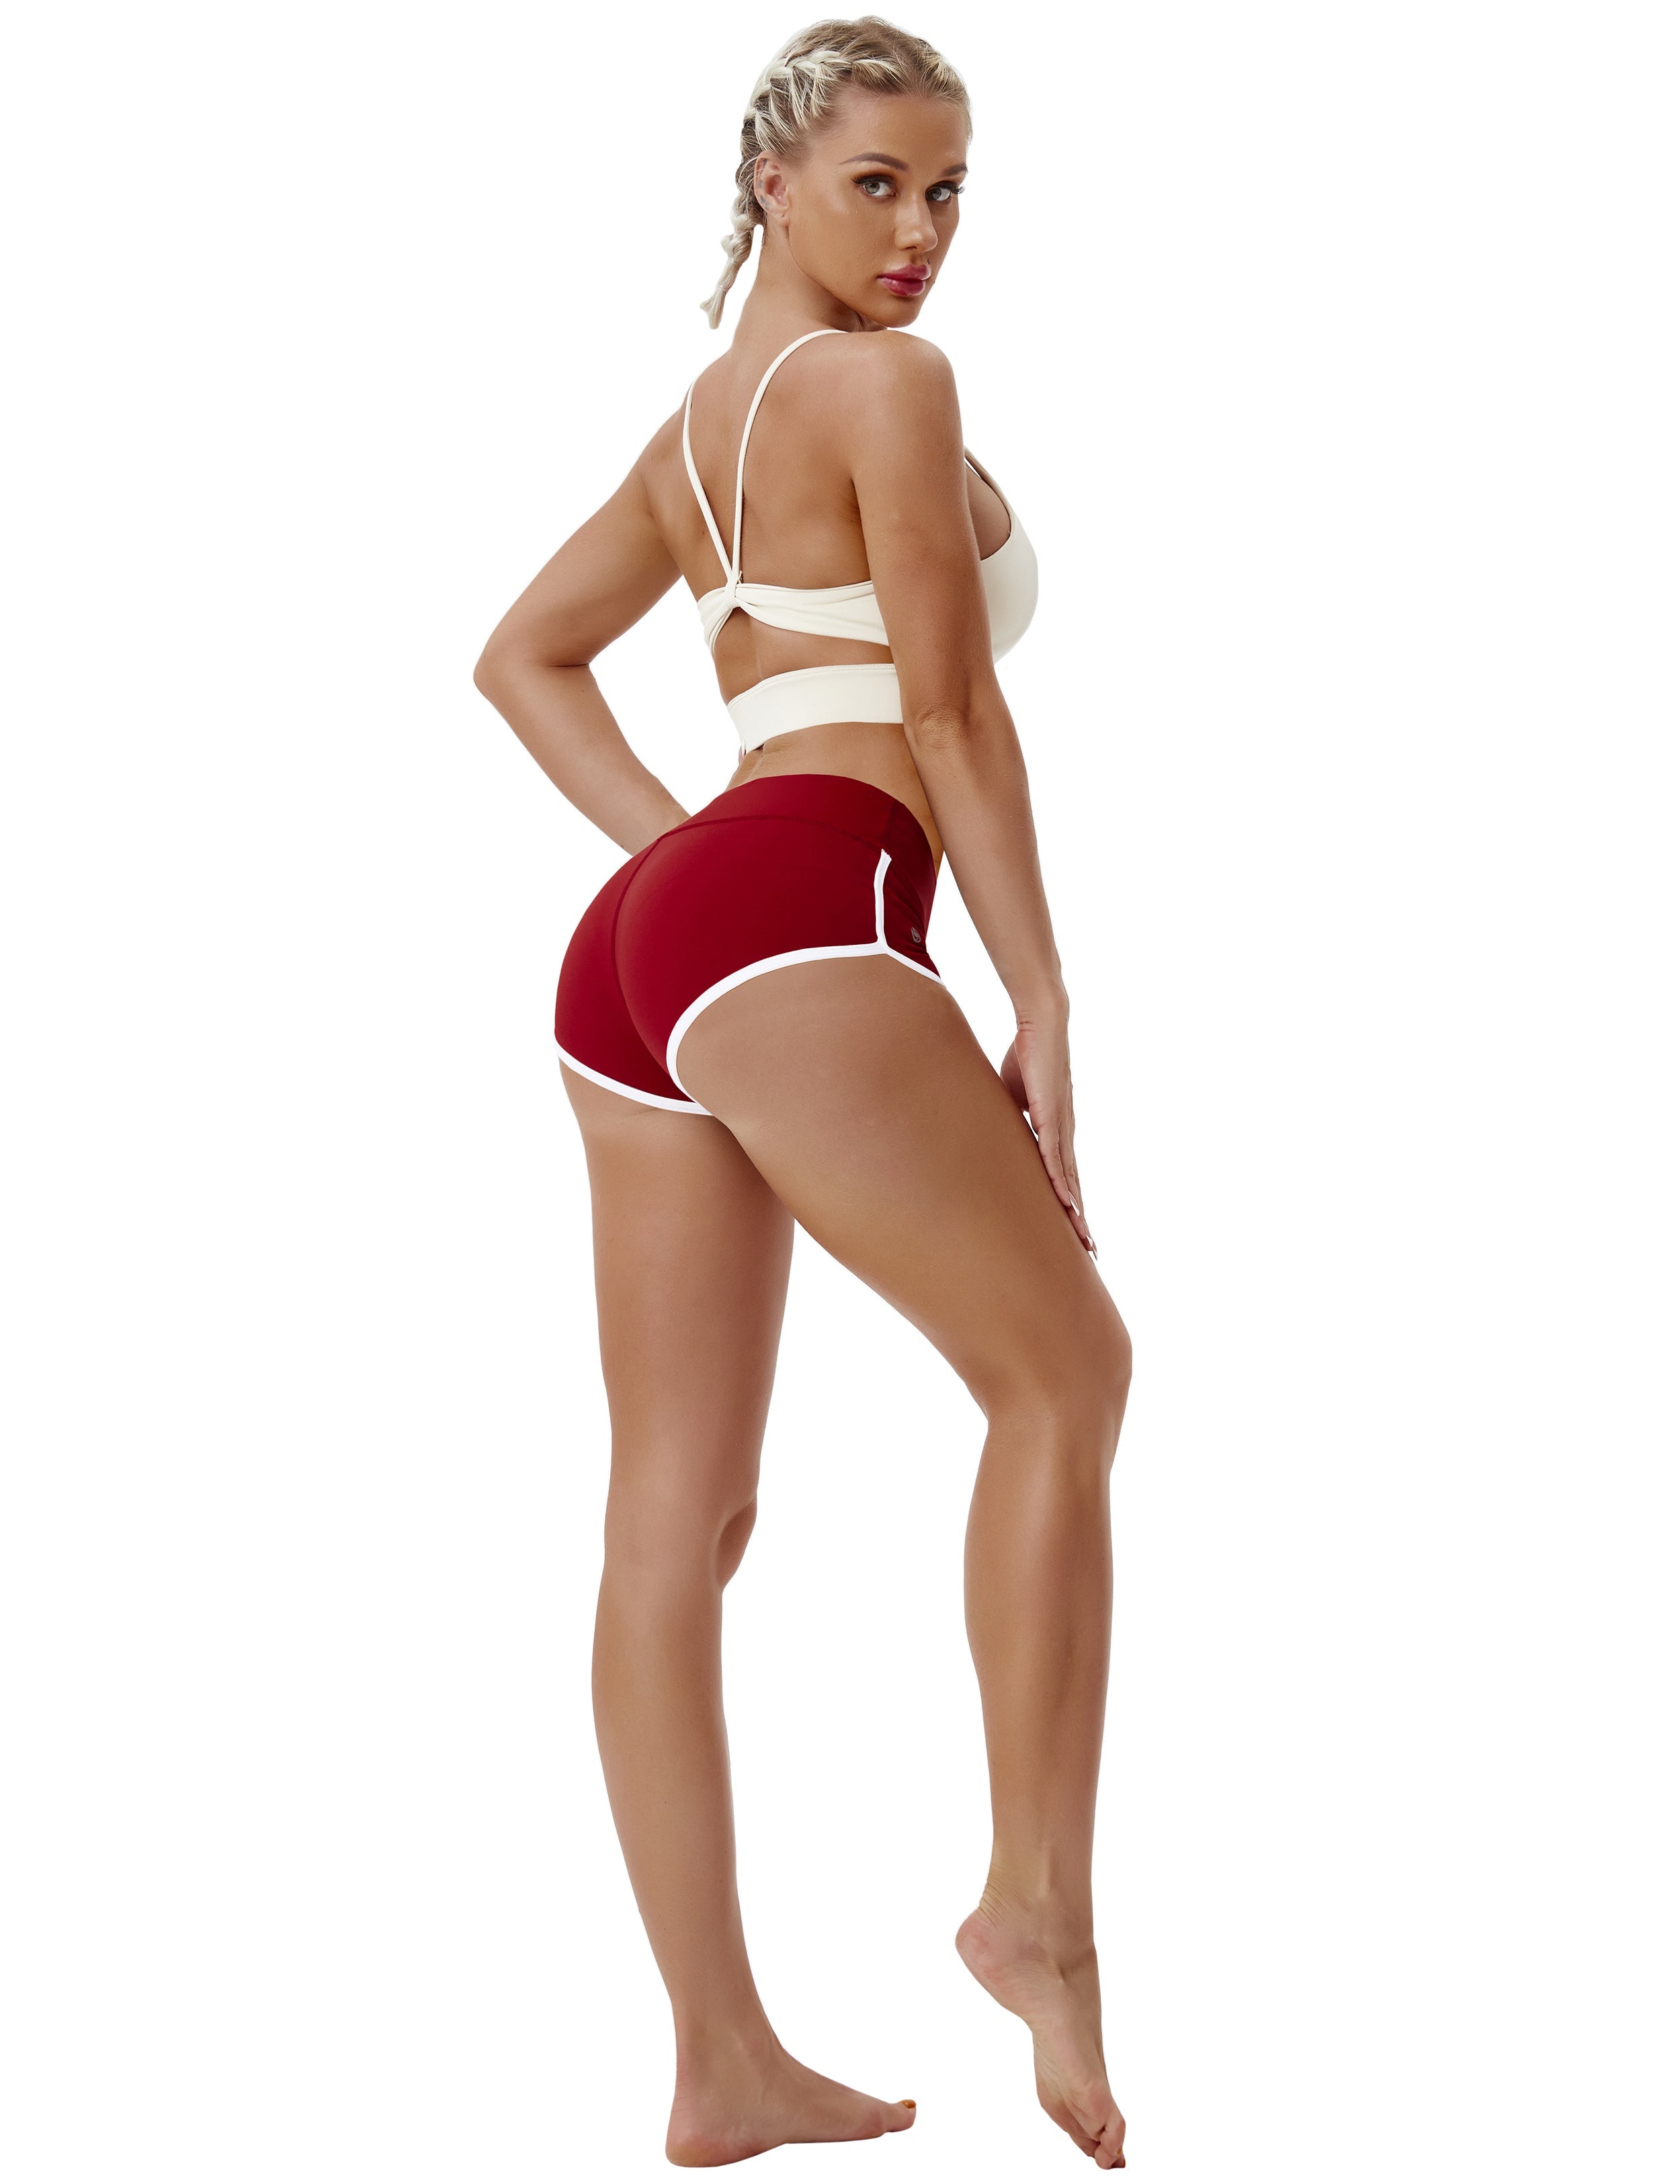 Sexy Booty Pilates Shorts cherryred Sleek, soft, smooth and totally comfortable: our newest sexy style is here. Softest-ever fabric High elasticity High density 4-way stretch Fabric doesn't attract lint easily No see-through Moisture-wicking Machine wash 75%Nylon/25%Spandex